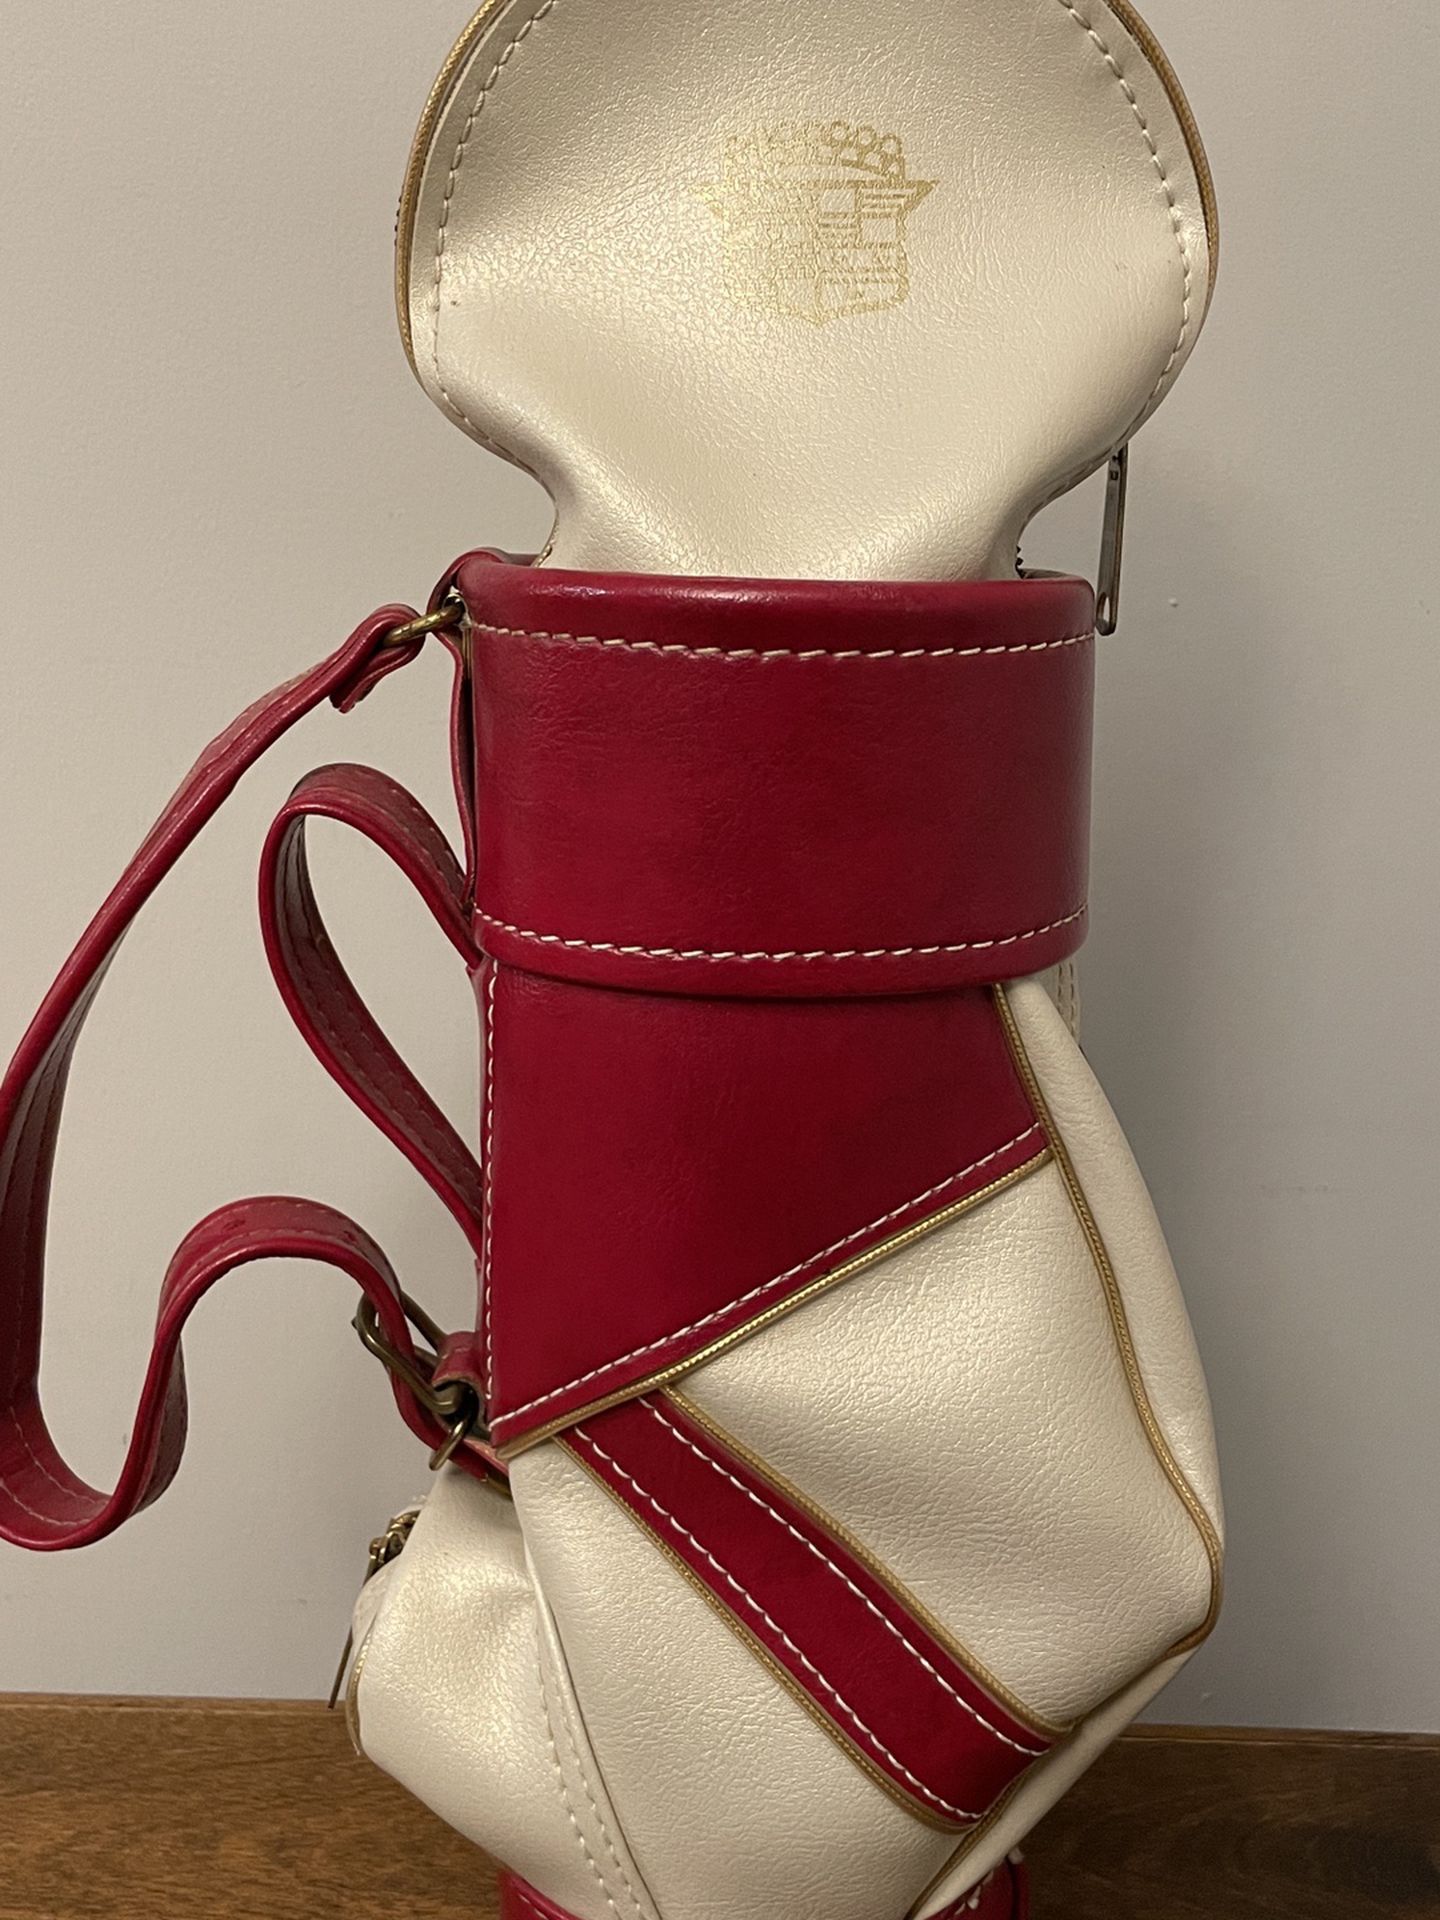 Cadillac Collectable Golf Caddy Wine Bottle Holder Red & White with Gold Trim